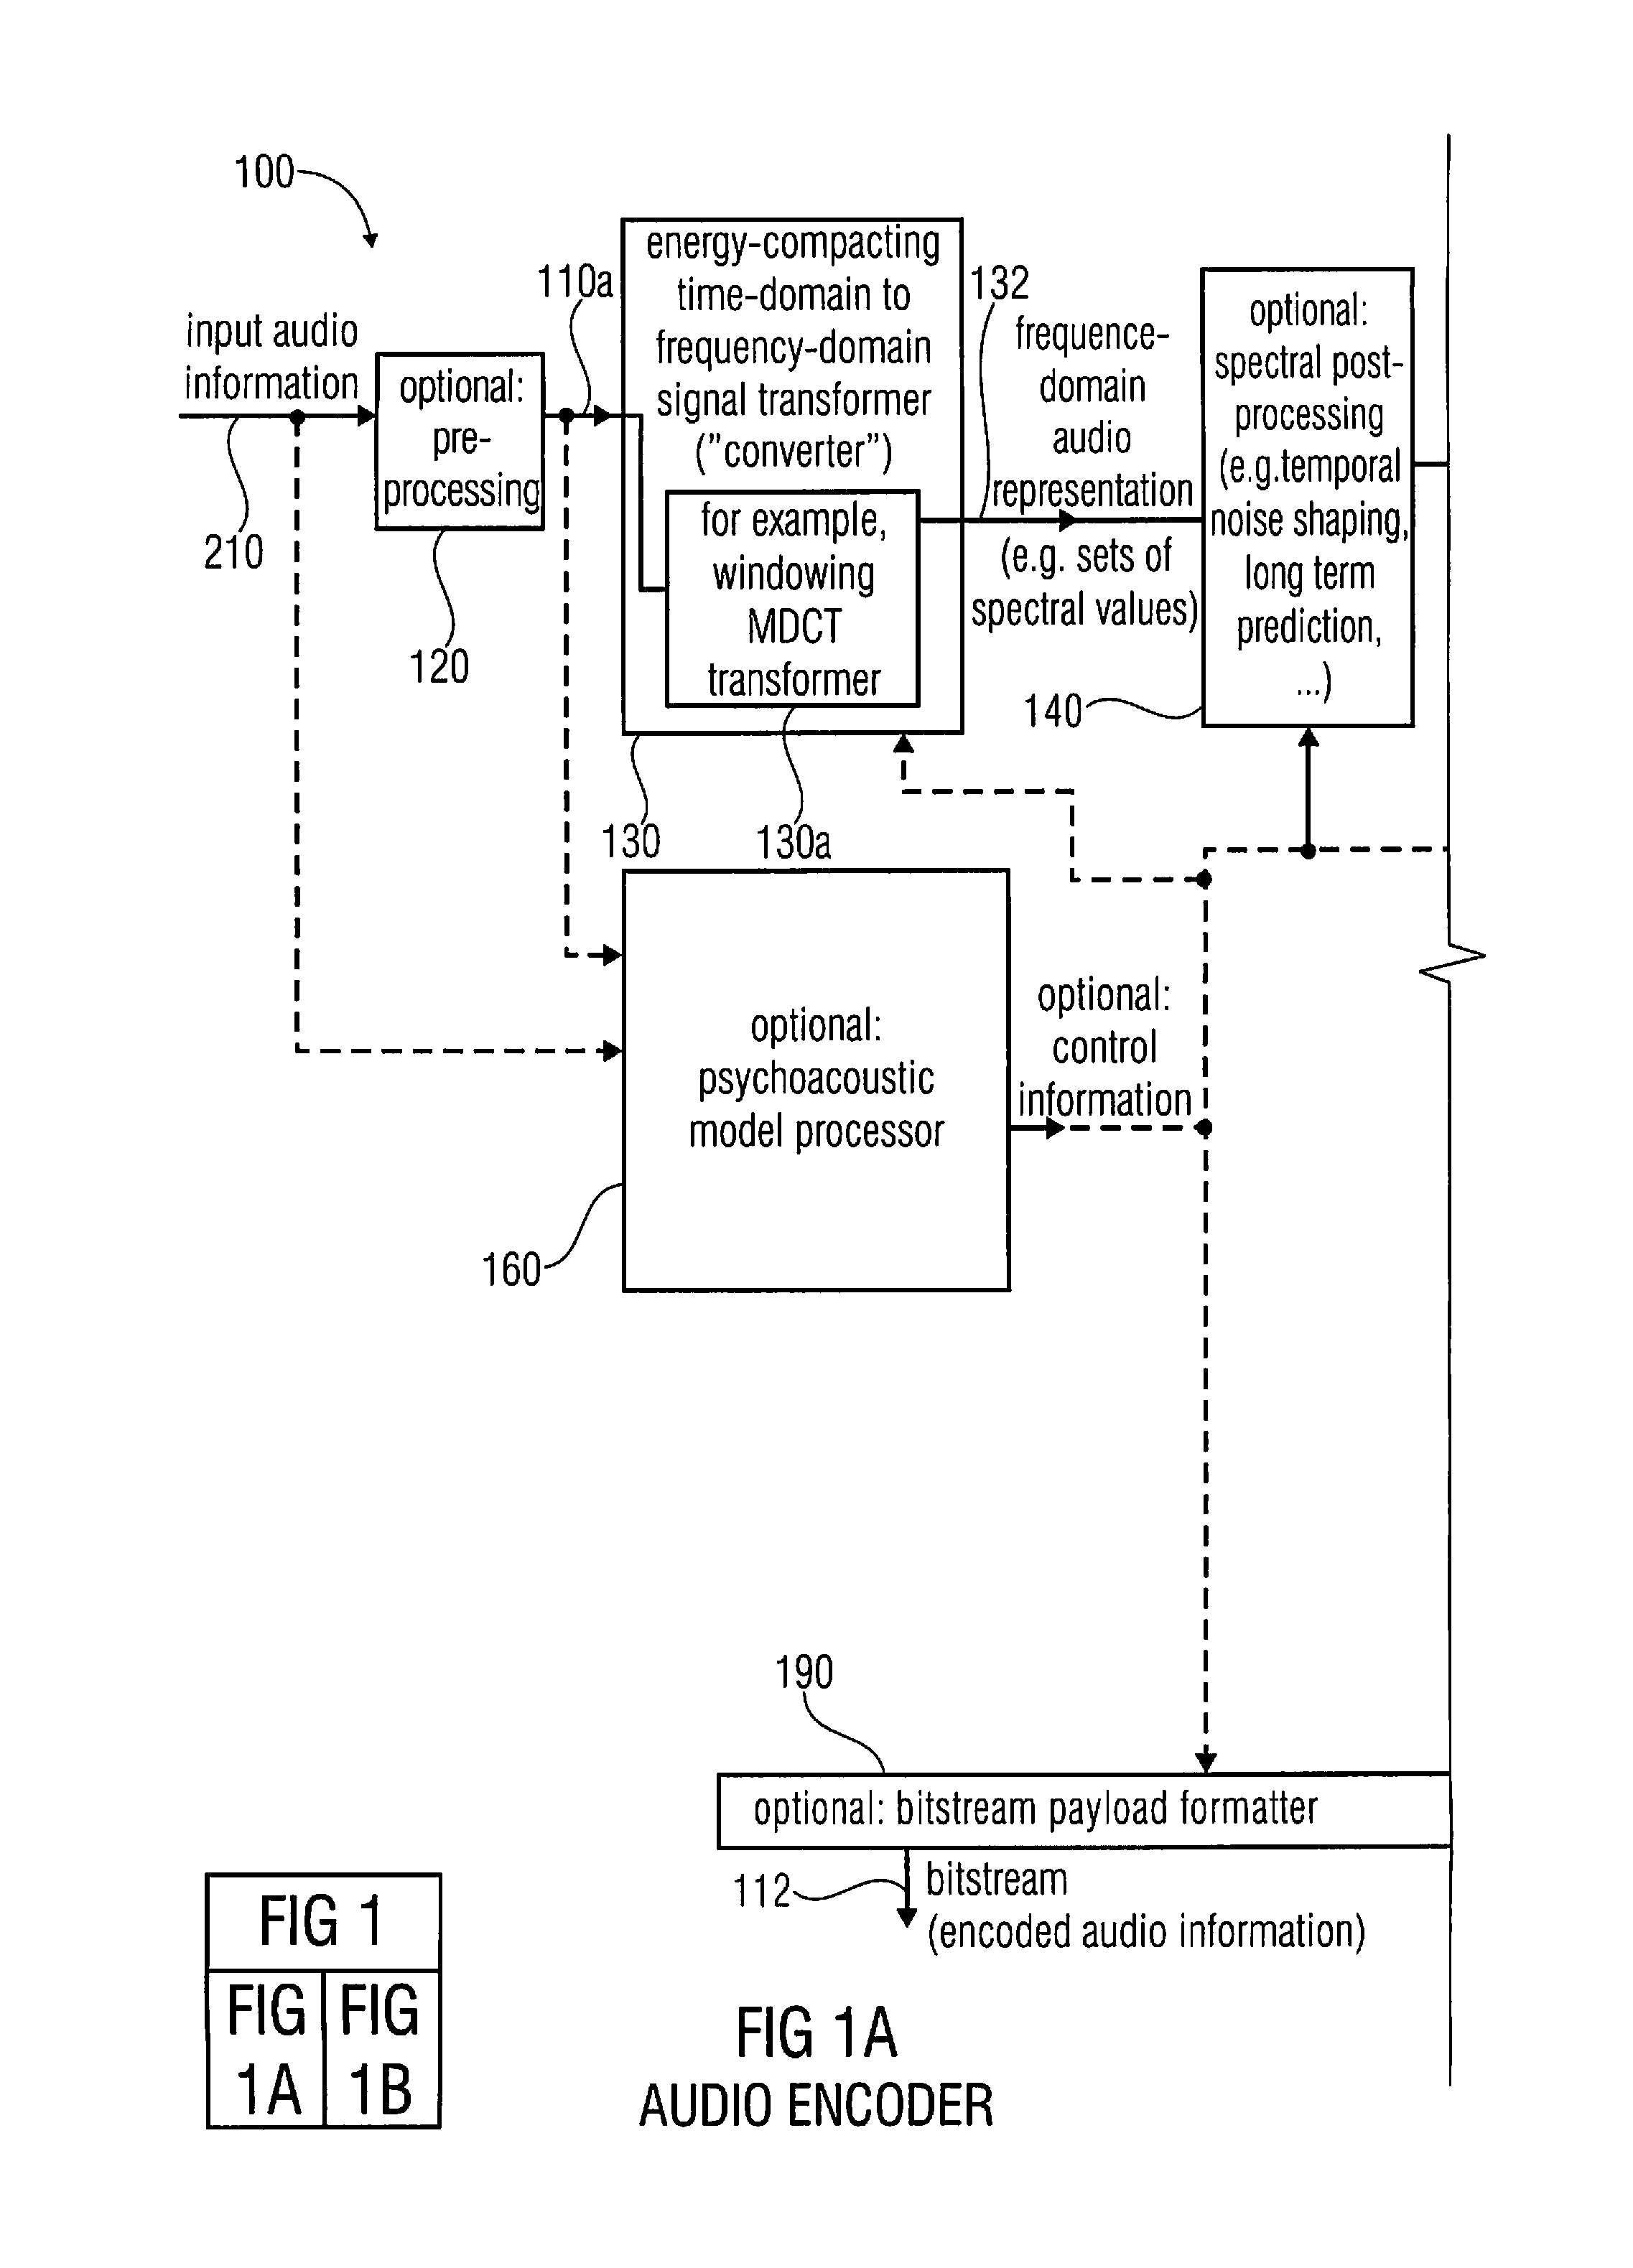 Audio encoder, audio decoder, method for encoding an audio information, method for decoding an audio information and computer program using a detection of a group of previously-decoded spectral values